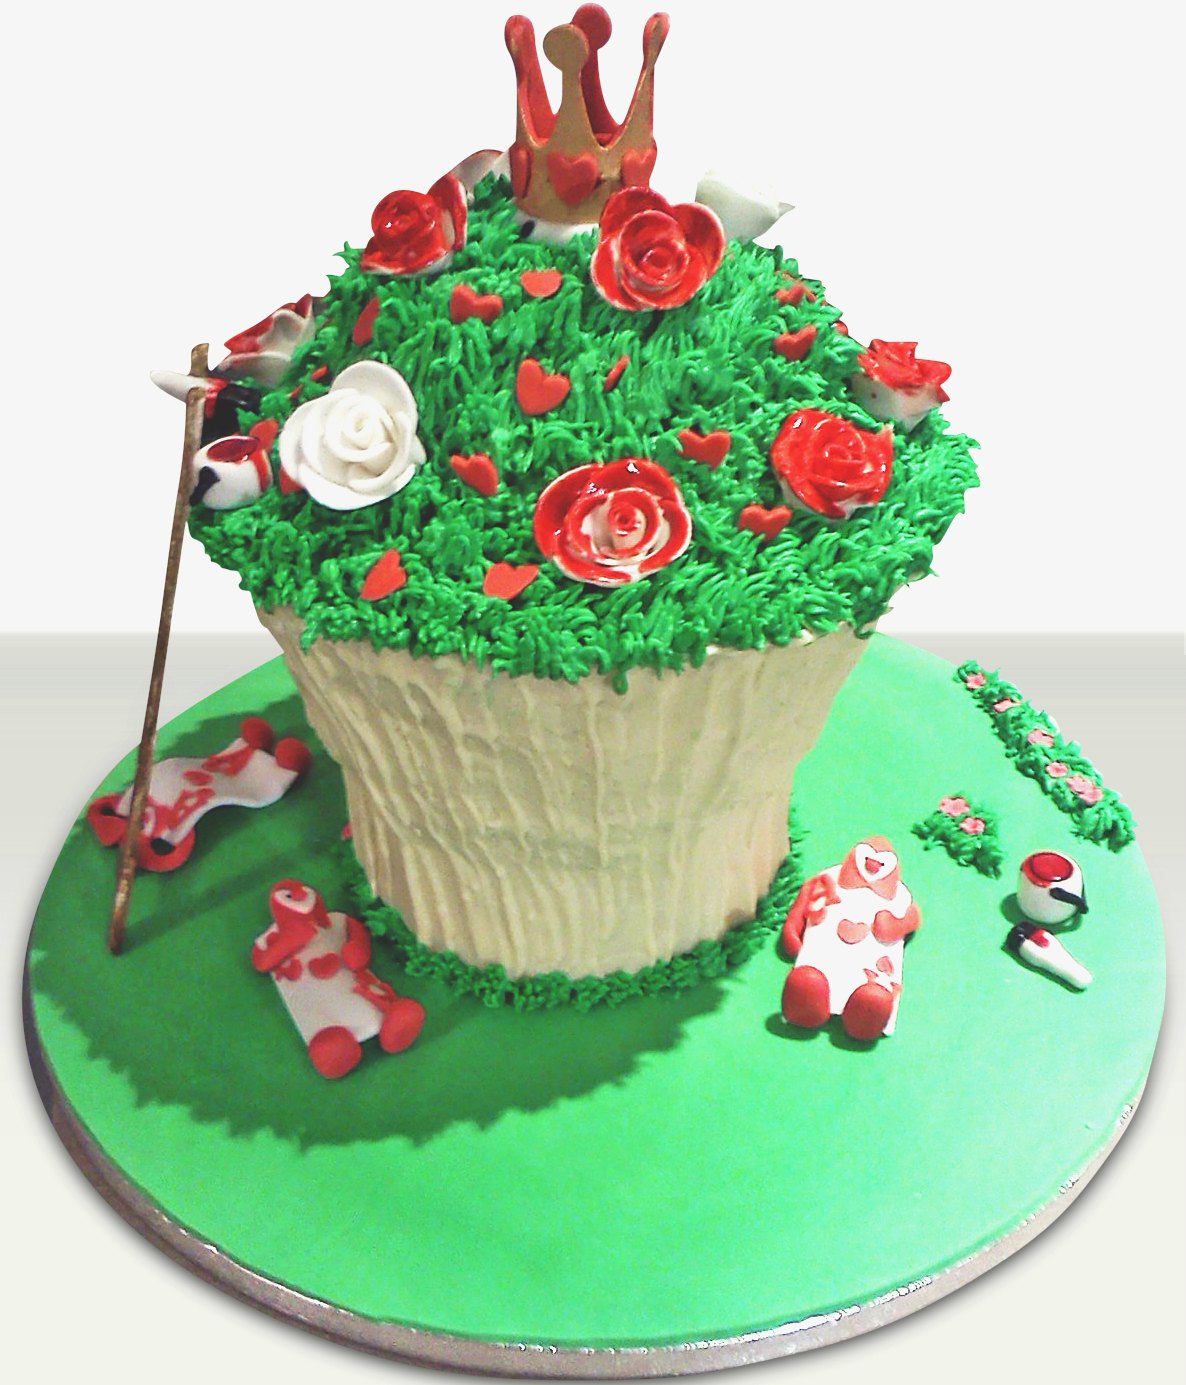 white roses painted red alice themed cake